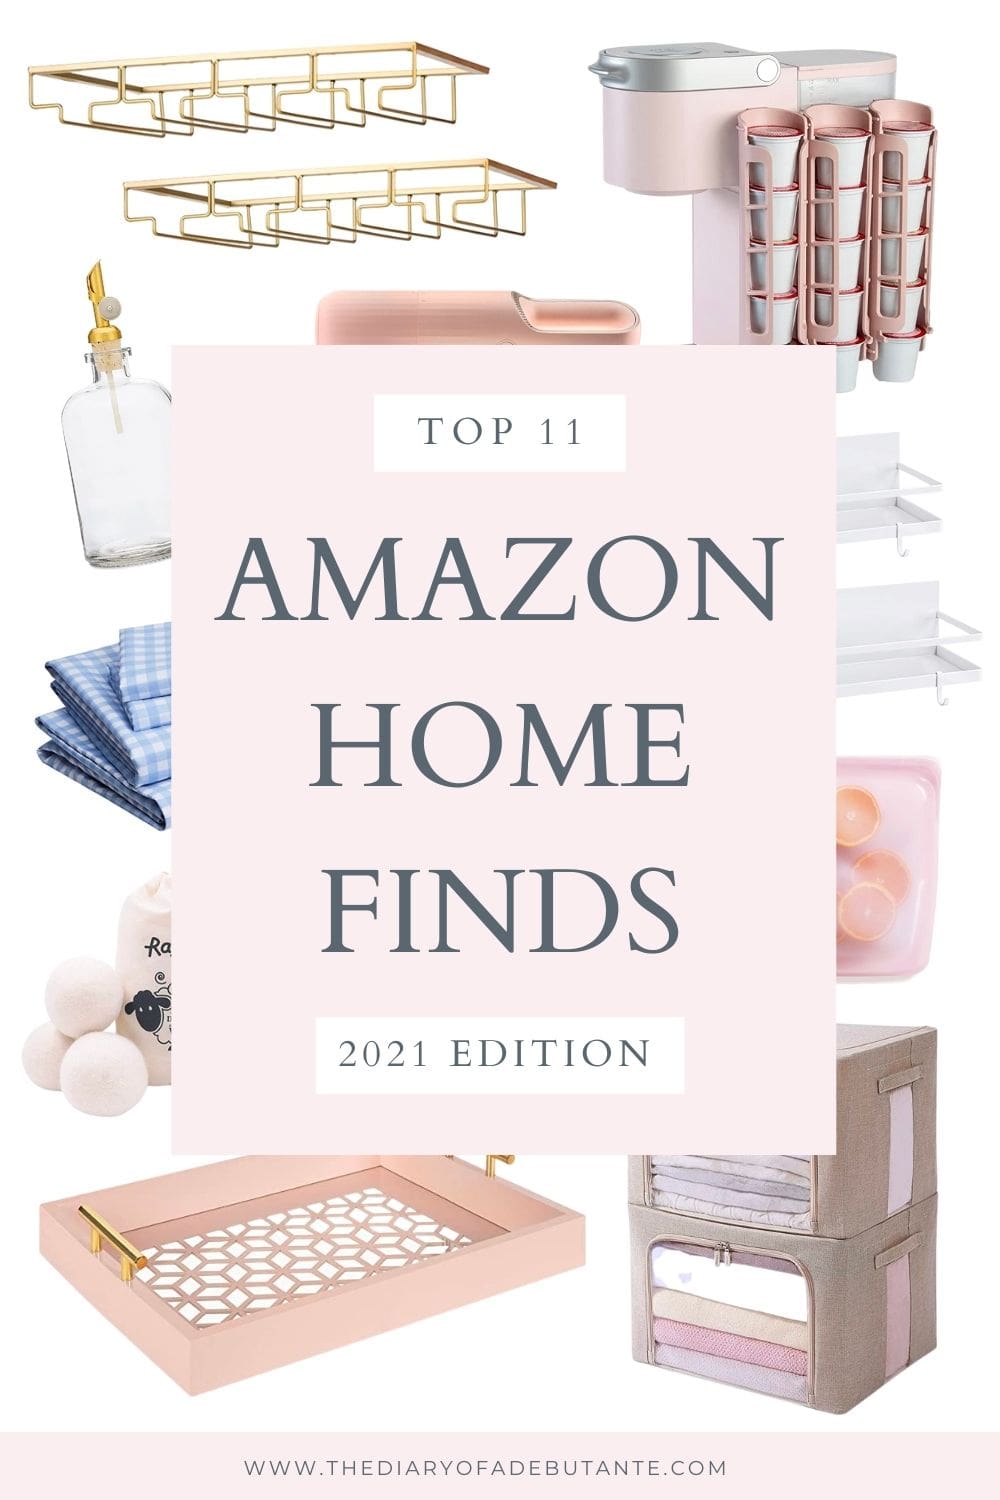 The best Amazon home finds 2021 rounded up by blogger Stephanie Ziajka on Diary of a Debutante